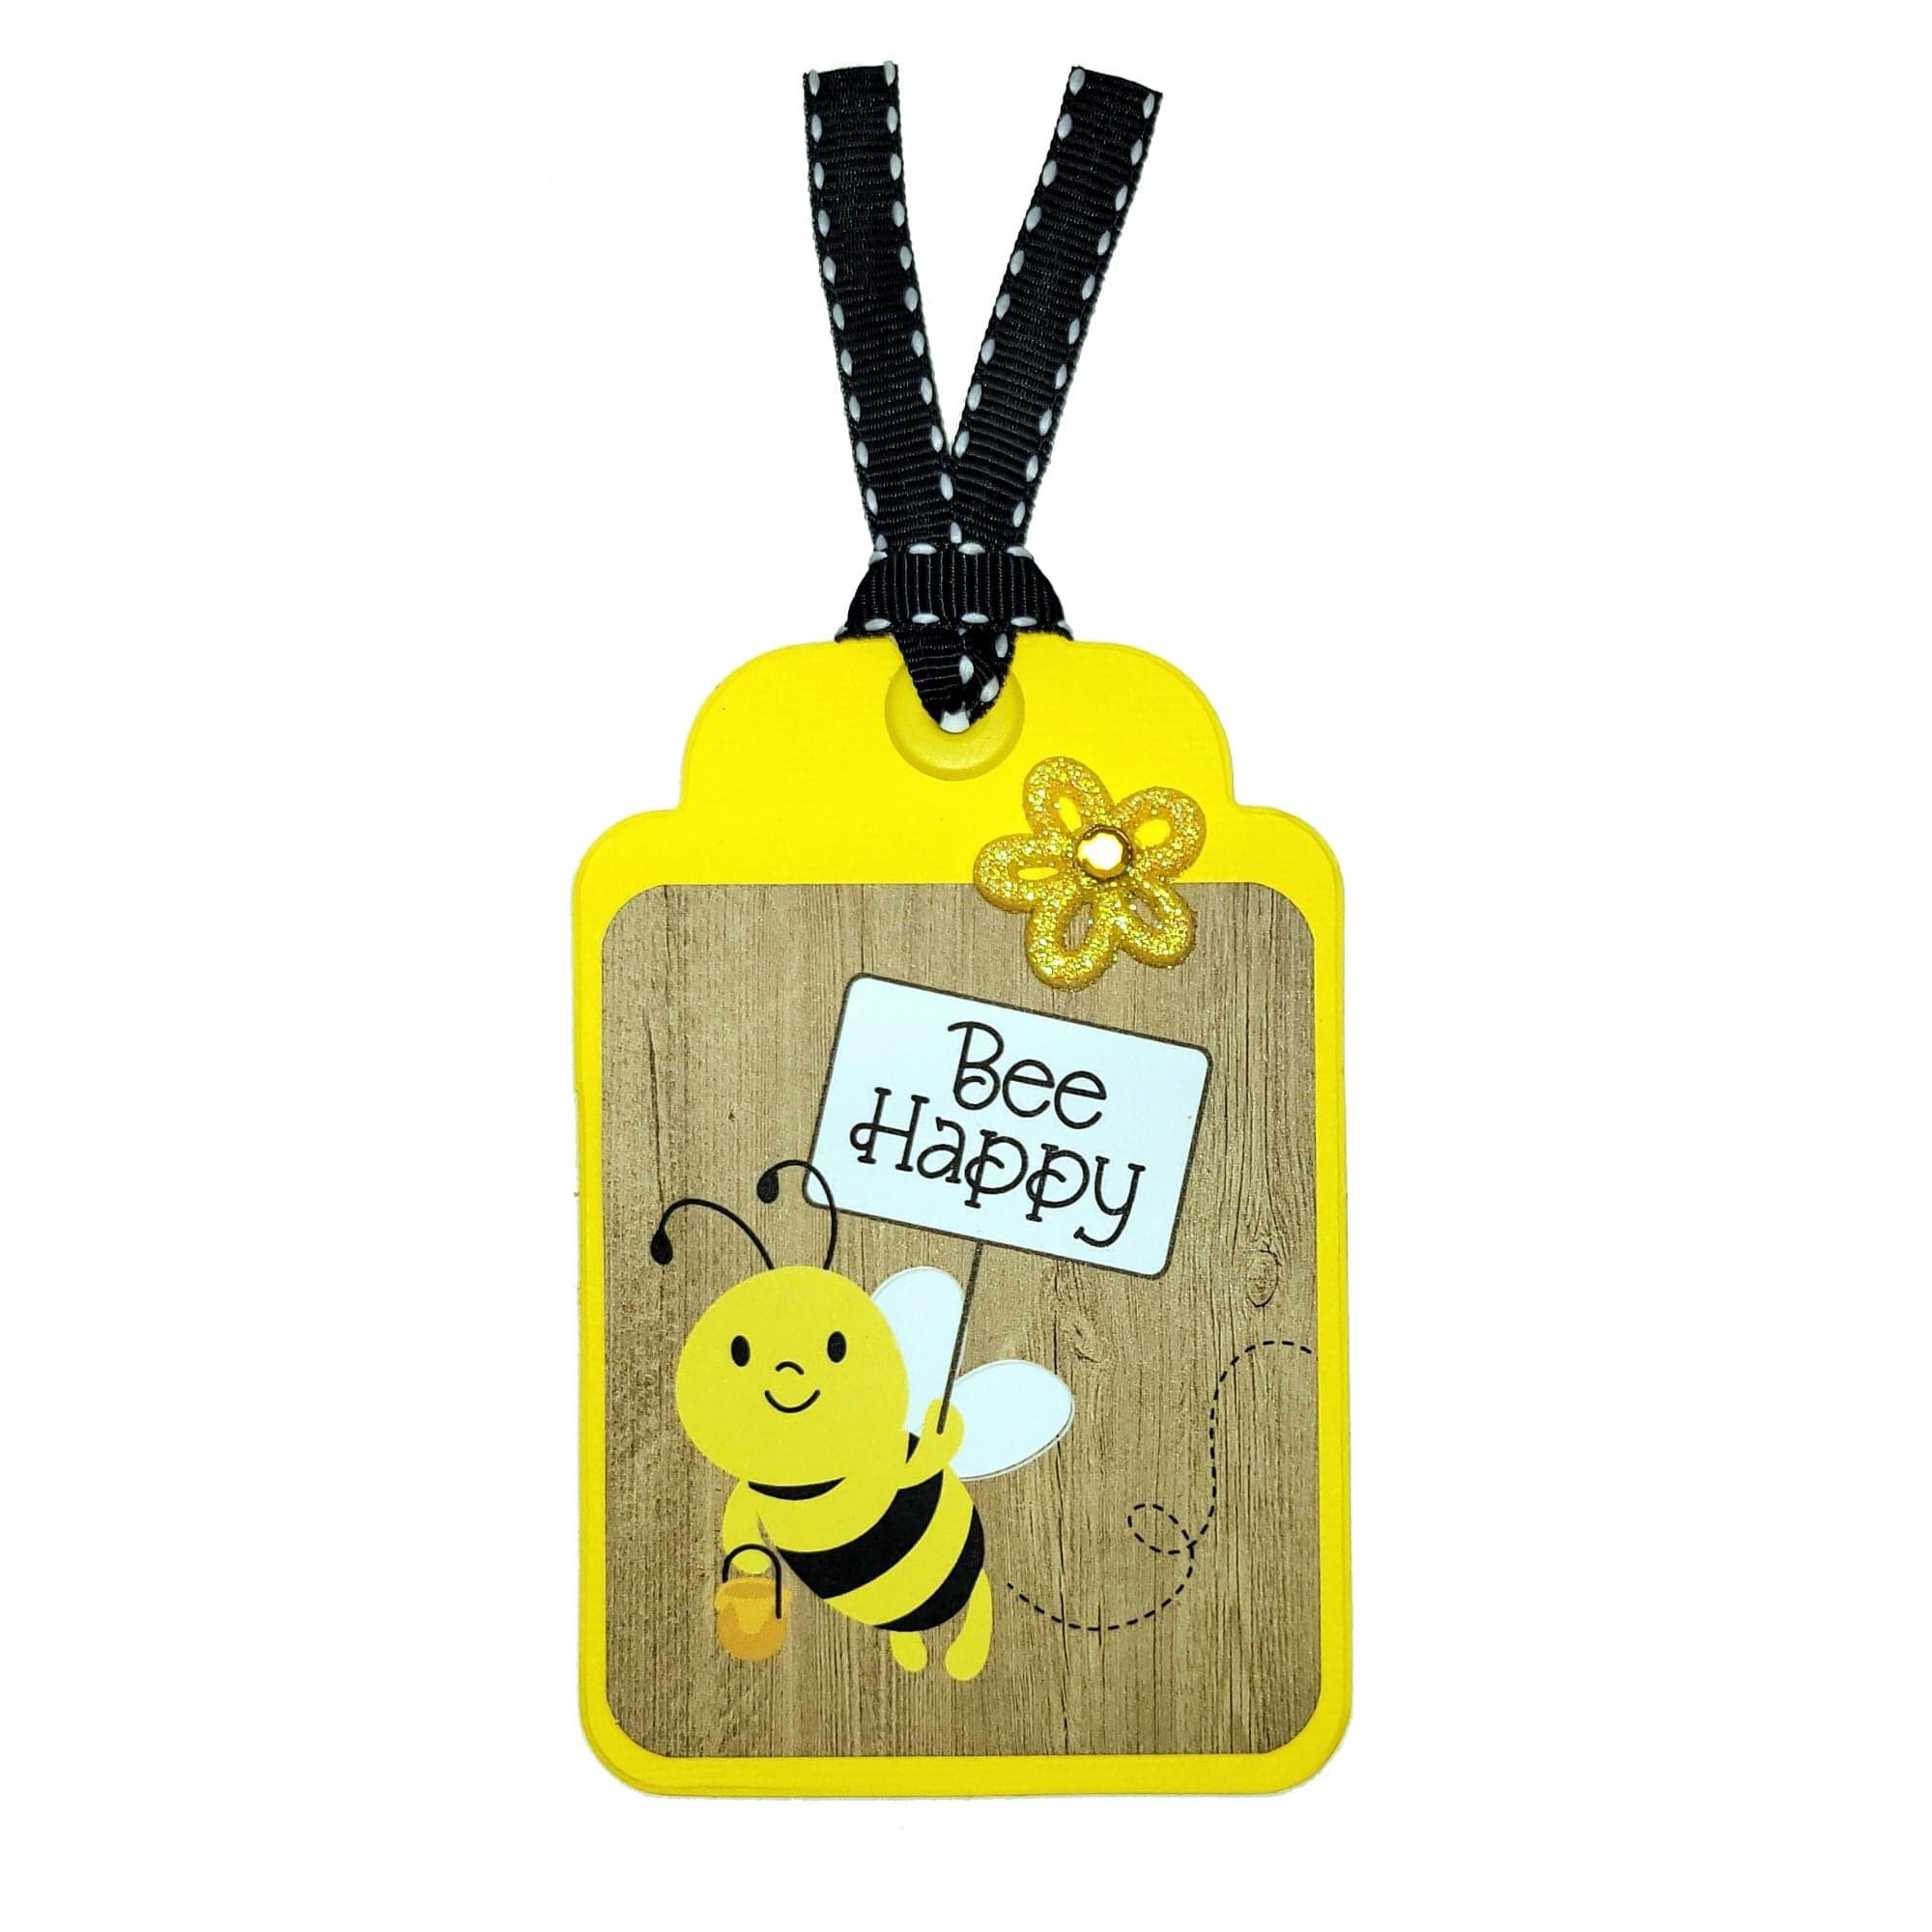 Honey Bee Collection Bee Happy 3 x 4 Scrapbook Tag Embellishment by SSC Designs - Scrapbook Supply Companies